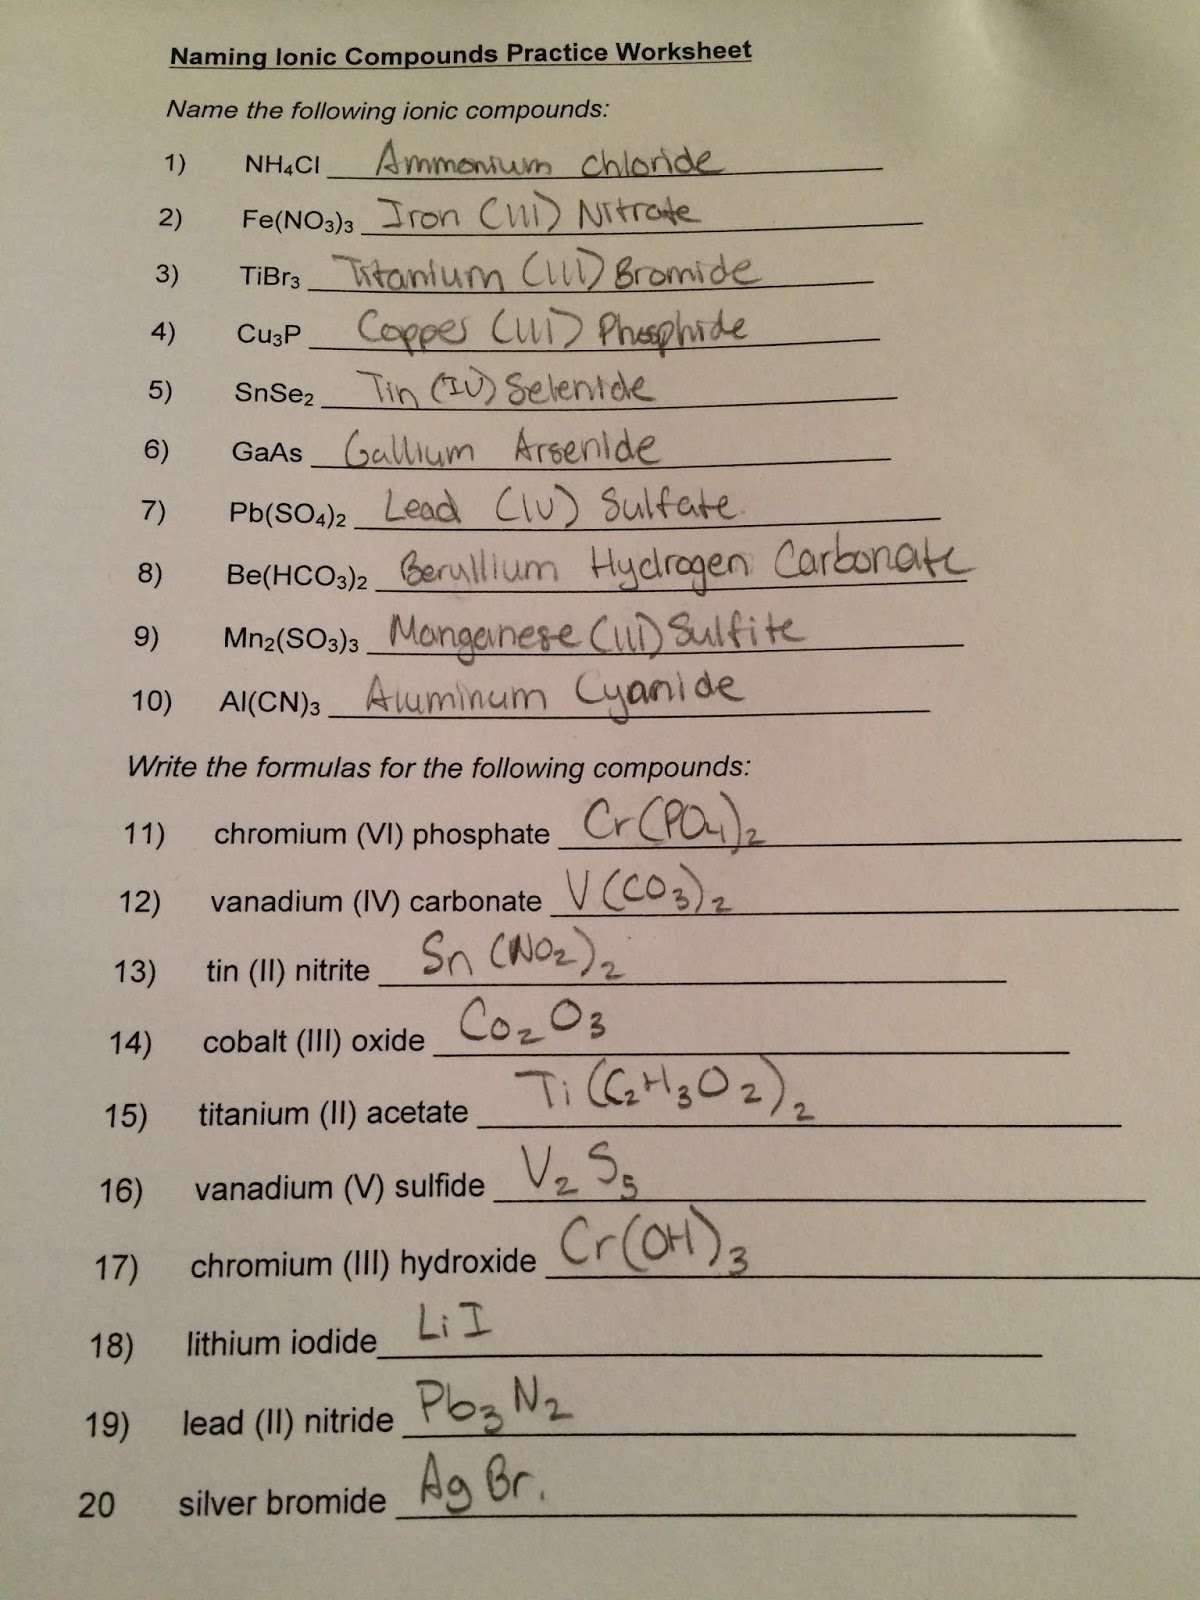 All Ionic Compounds Worksheets Answers db excel com